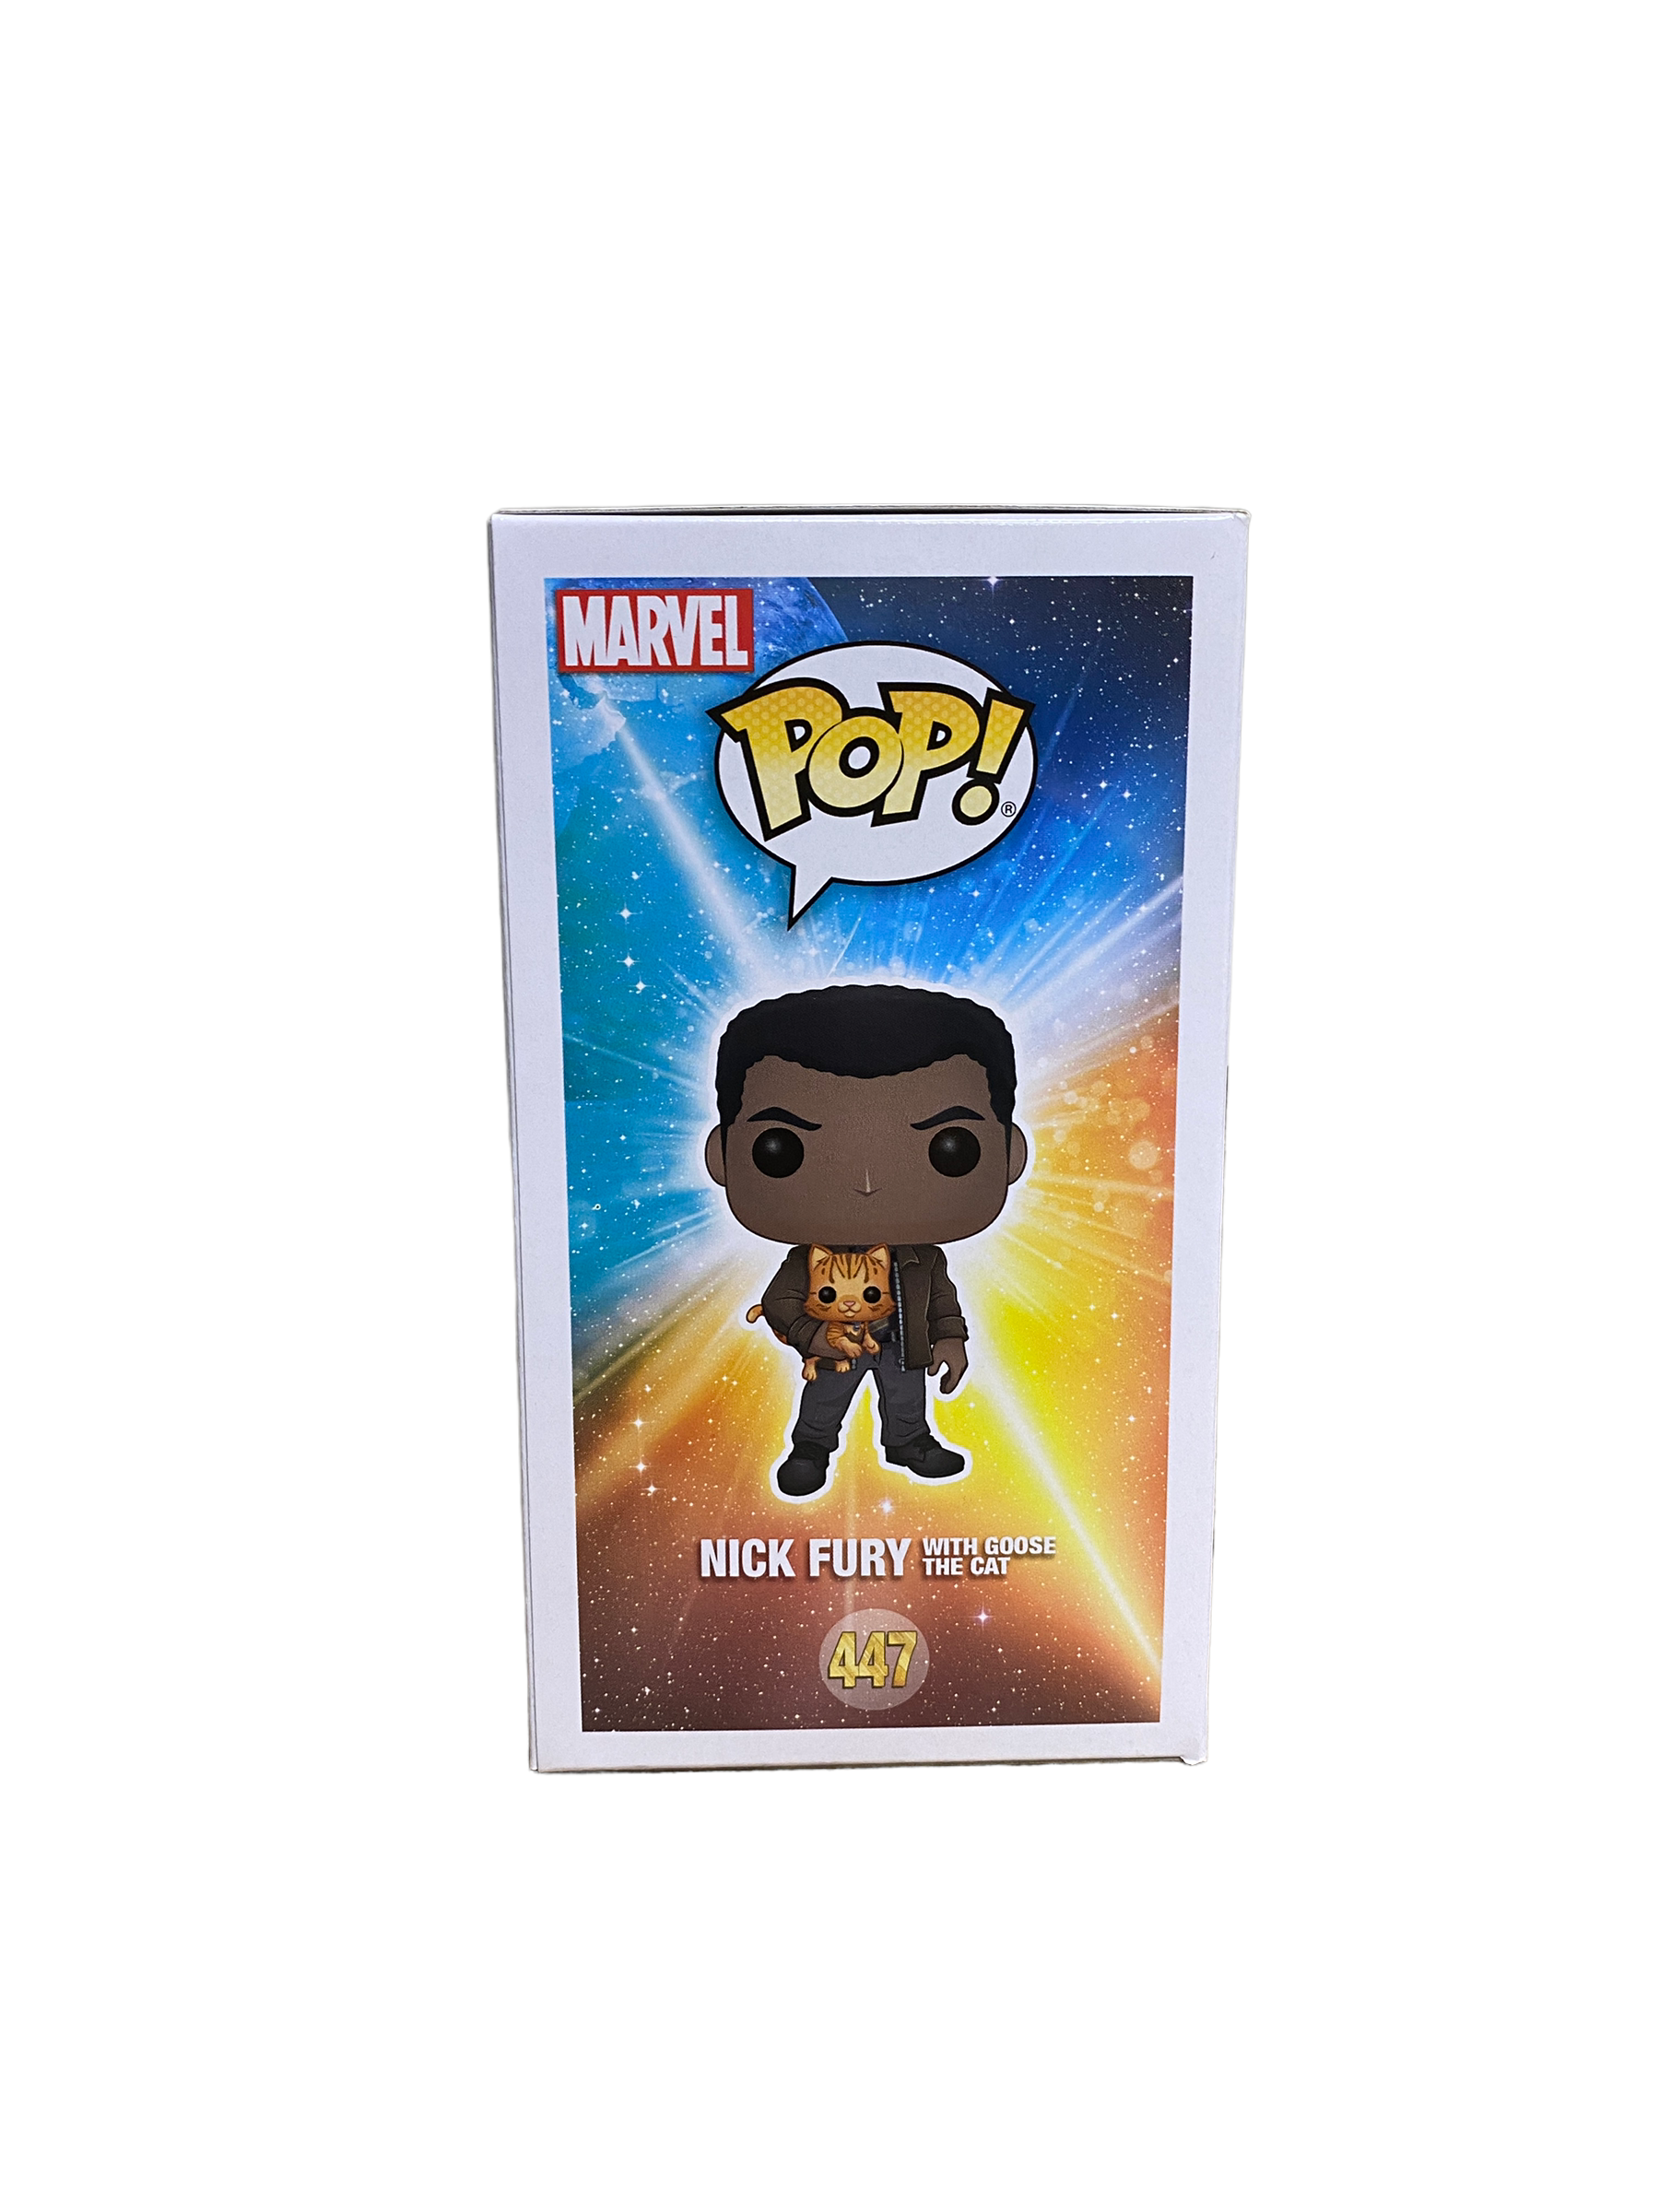 Nick Fury With Goose The Cat #447 Funko Pop! - Captain Marvel - Marvel Collector Corps Exclusive - Condition 8.75/10